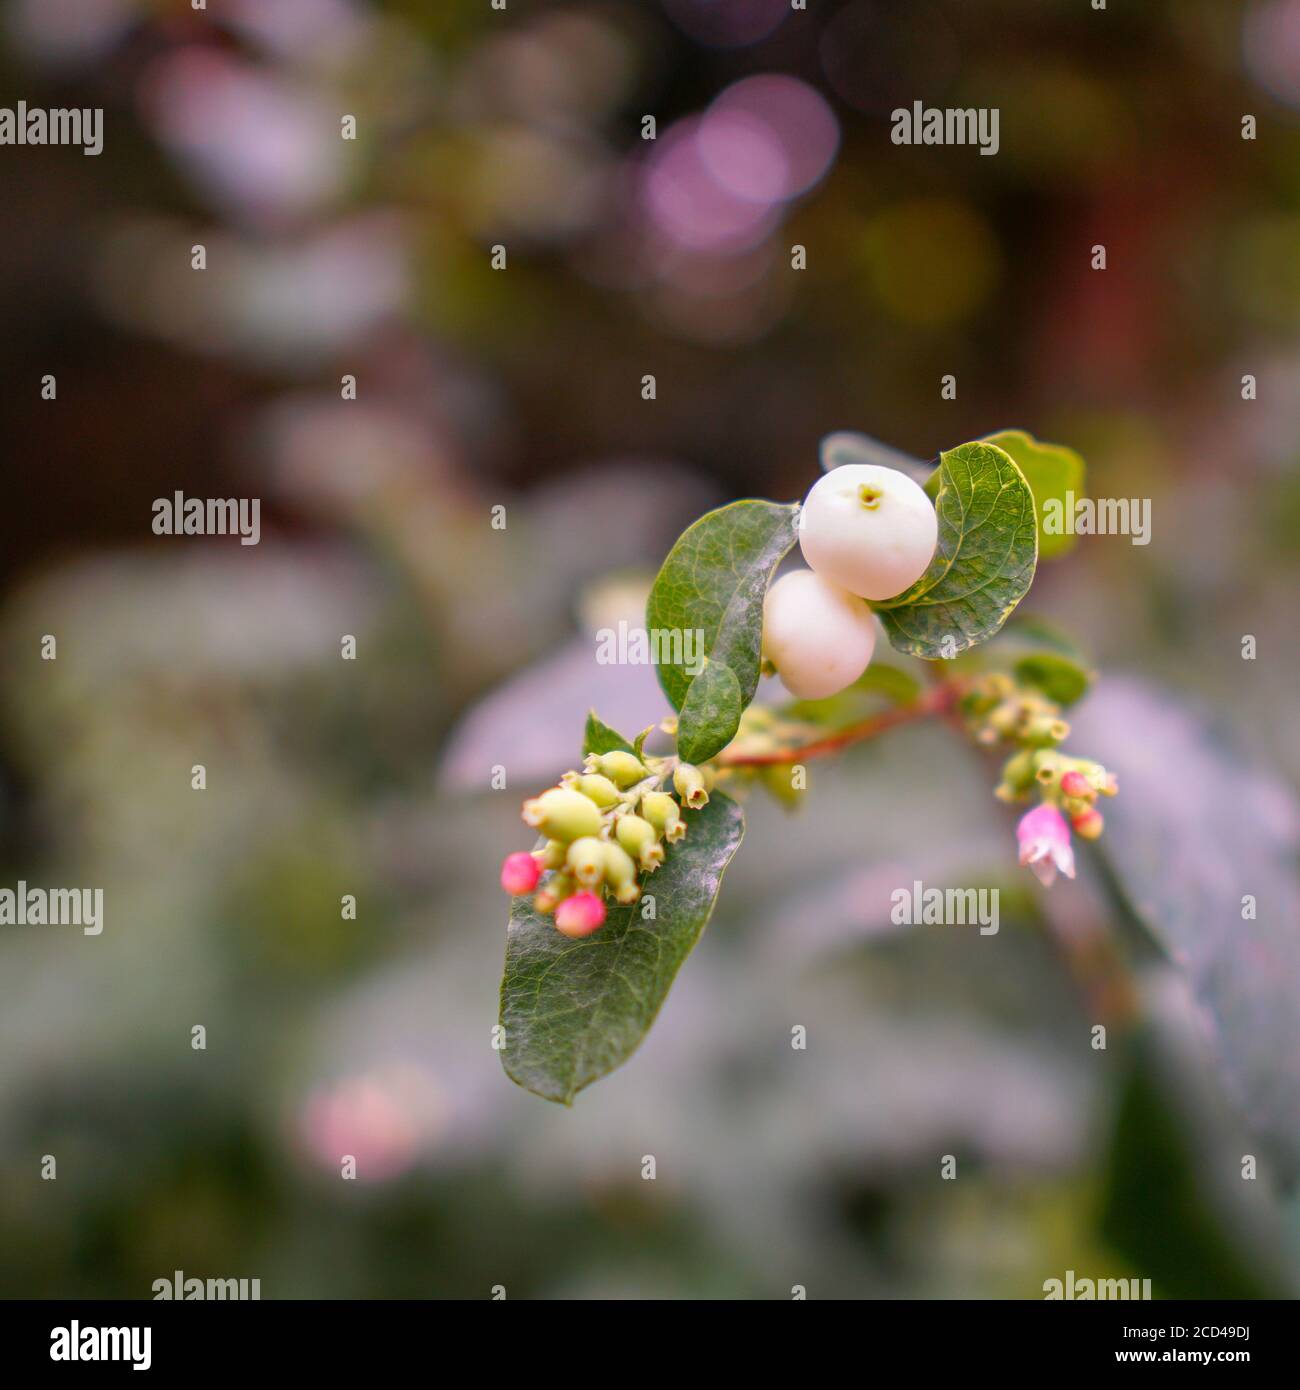 Closeup shot of a white snowberry plant in a city's park Stock Photo